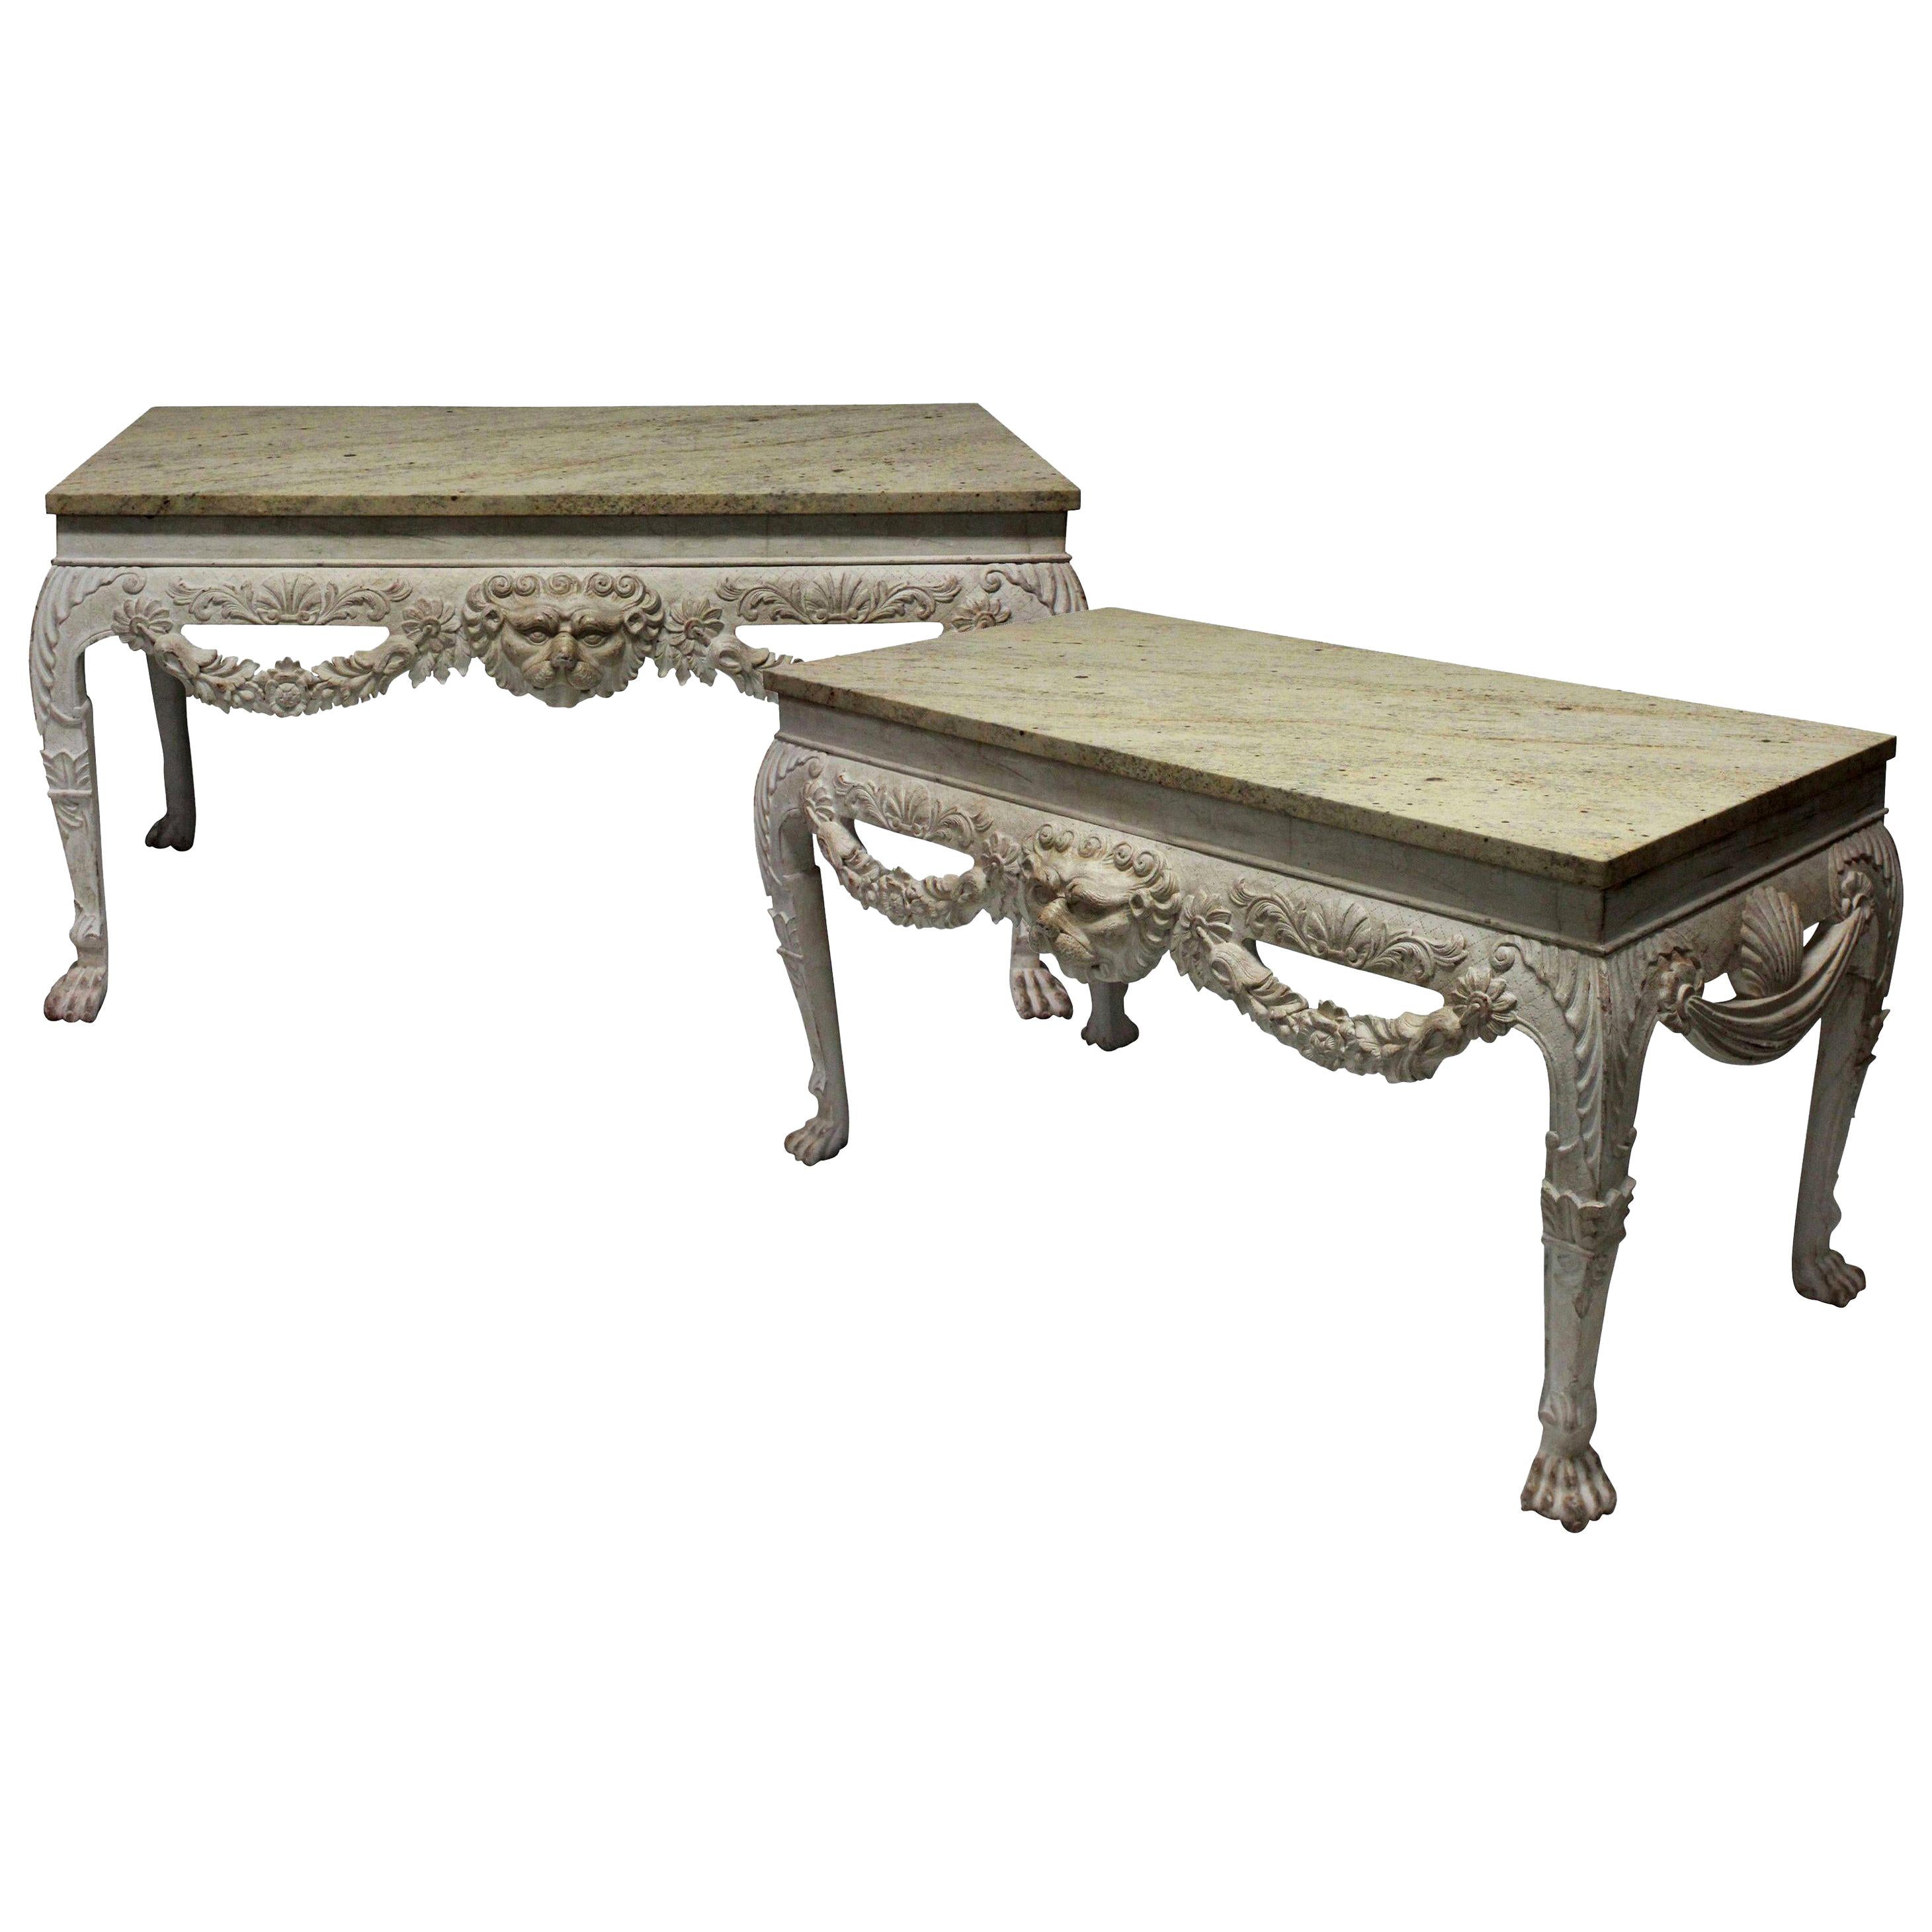 Pair of Large English Country House Console Tables